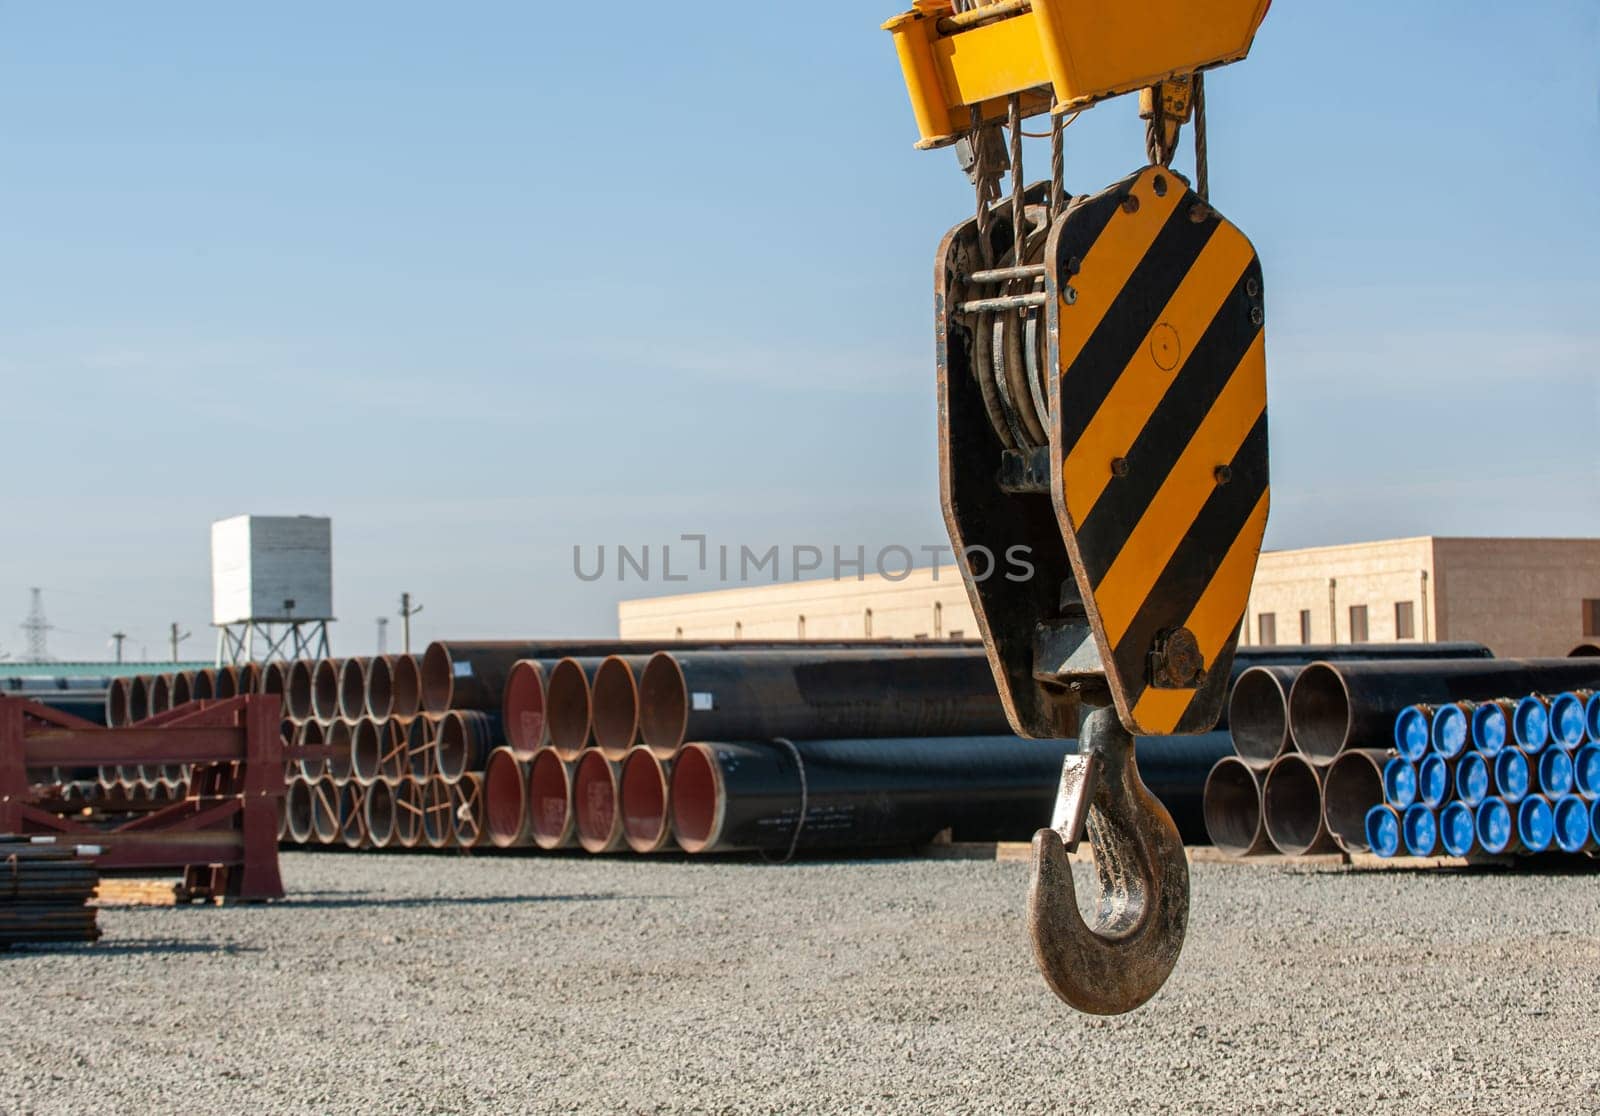 A close-up of a construction crane hook against the background of a site with oilfield pipes